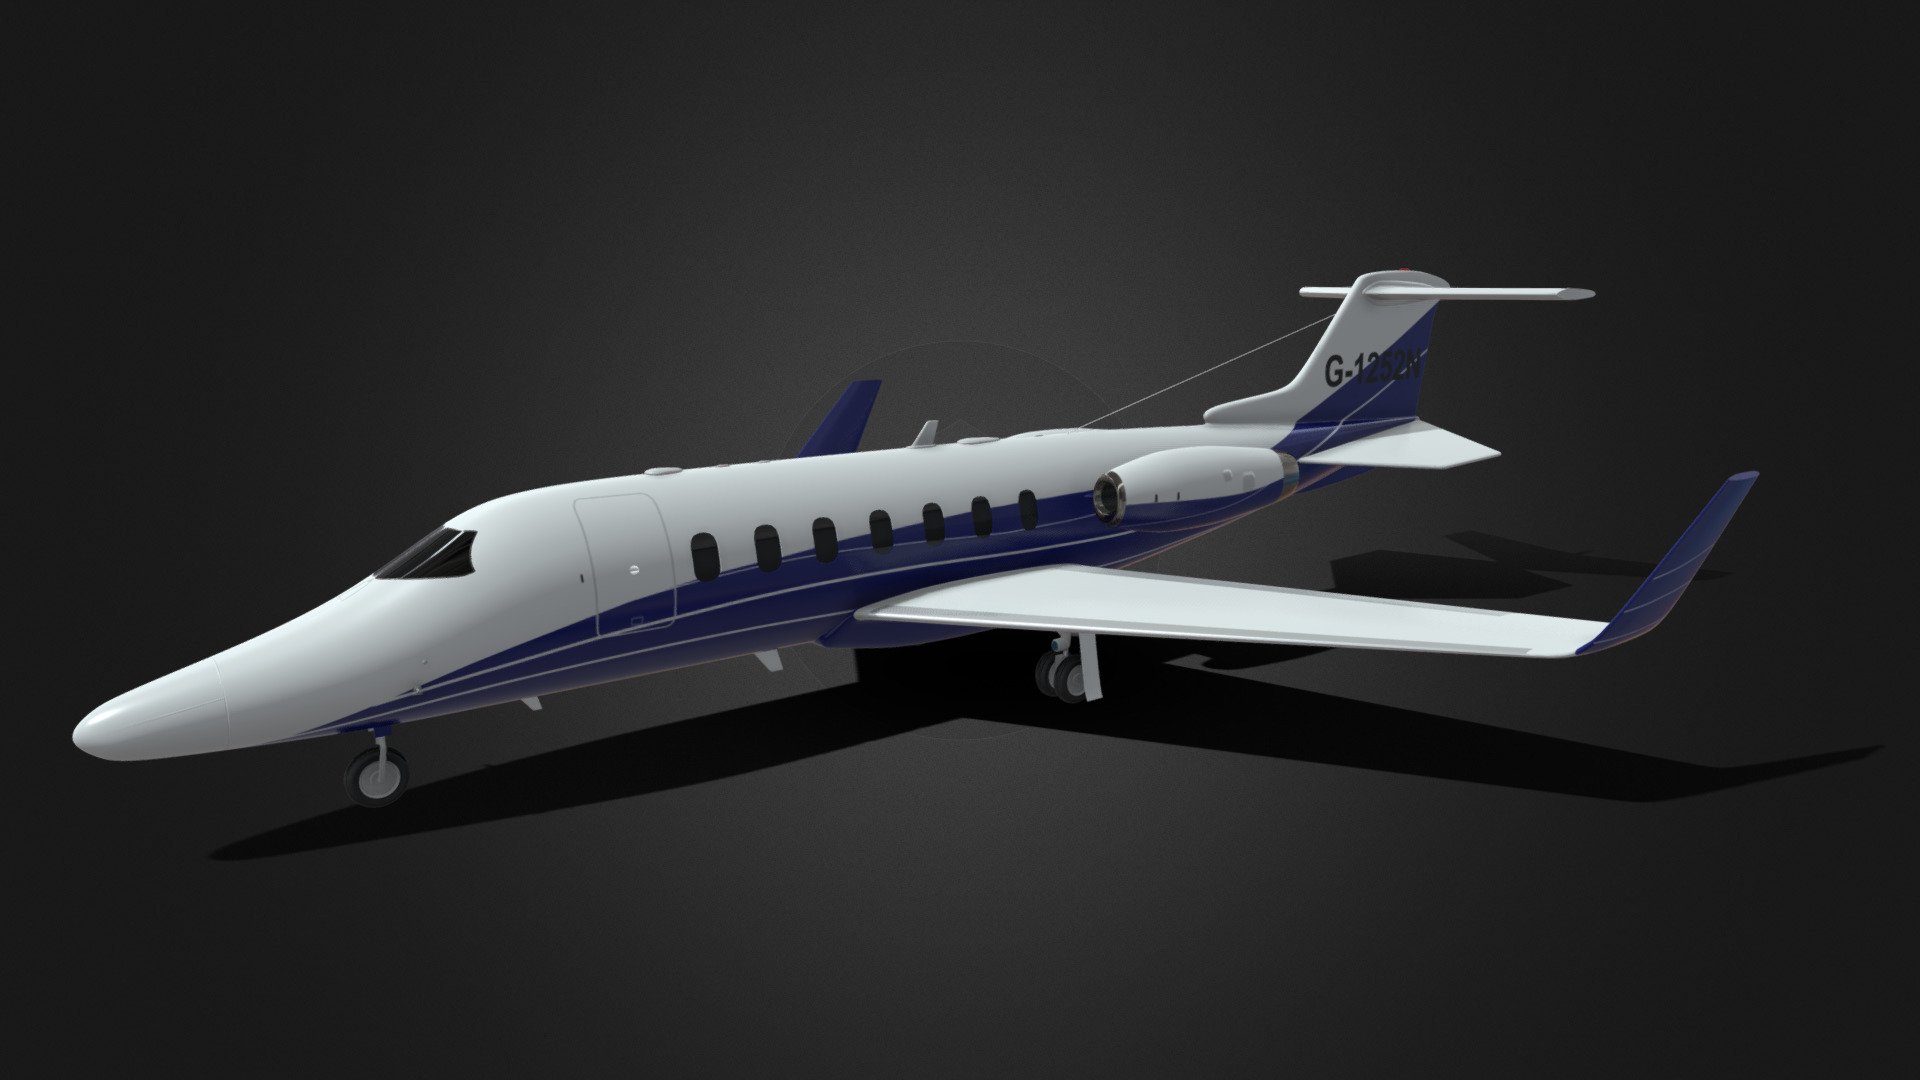 -Model as is or edited can not be distributed free of charge or sold on any other websites. This model Is only available to purchase on sketchfab through Lino3DCG- 

LearJet - LearJet - Buy Royalty Free 3D model by Lino3DCG 3d model